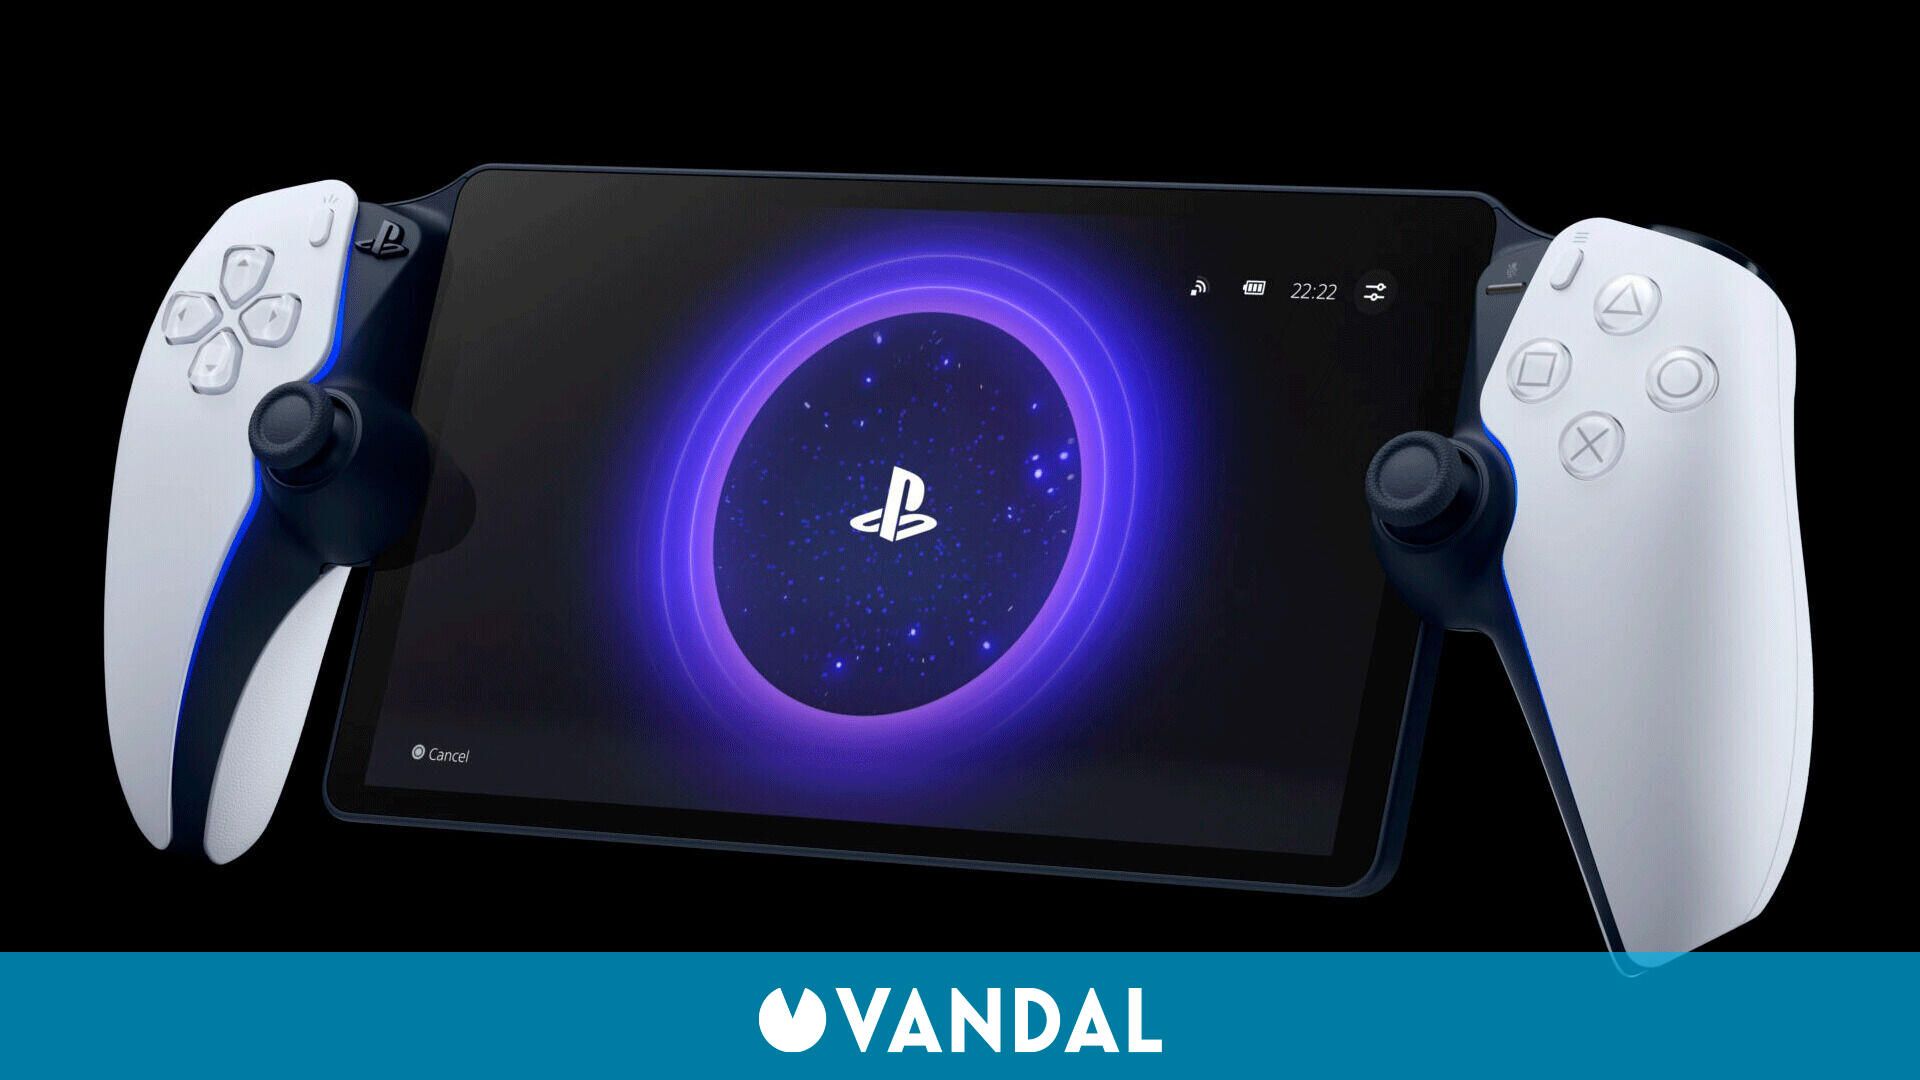 We already know the price of the PlayStation Portal, Sony’s new portable console for remote play on your PS5